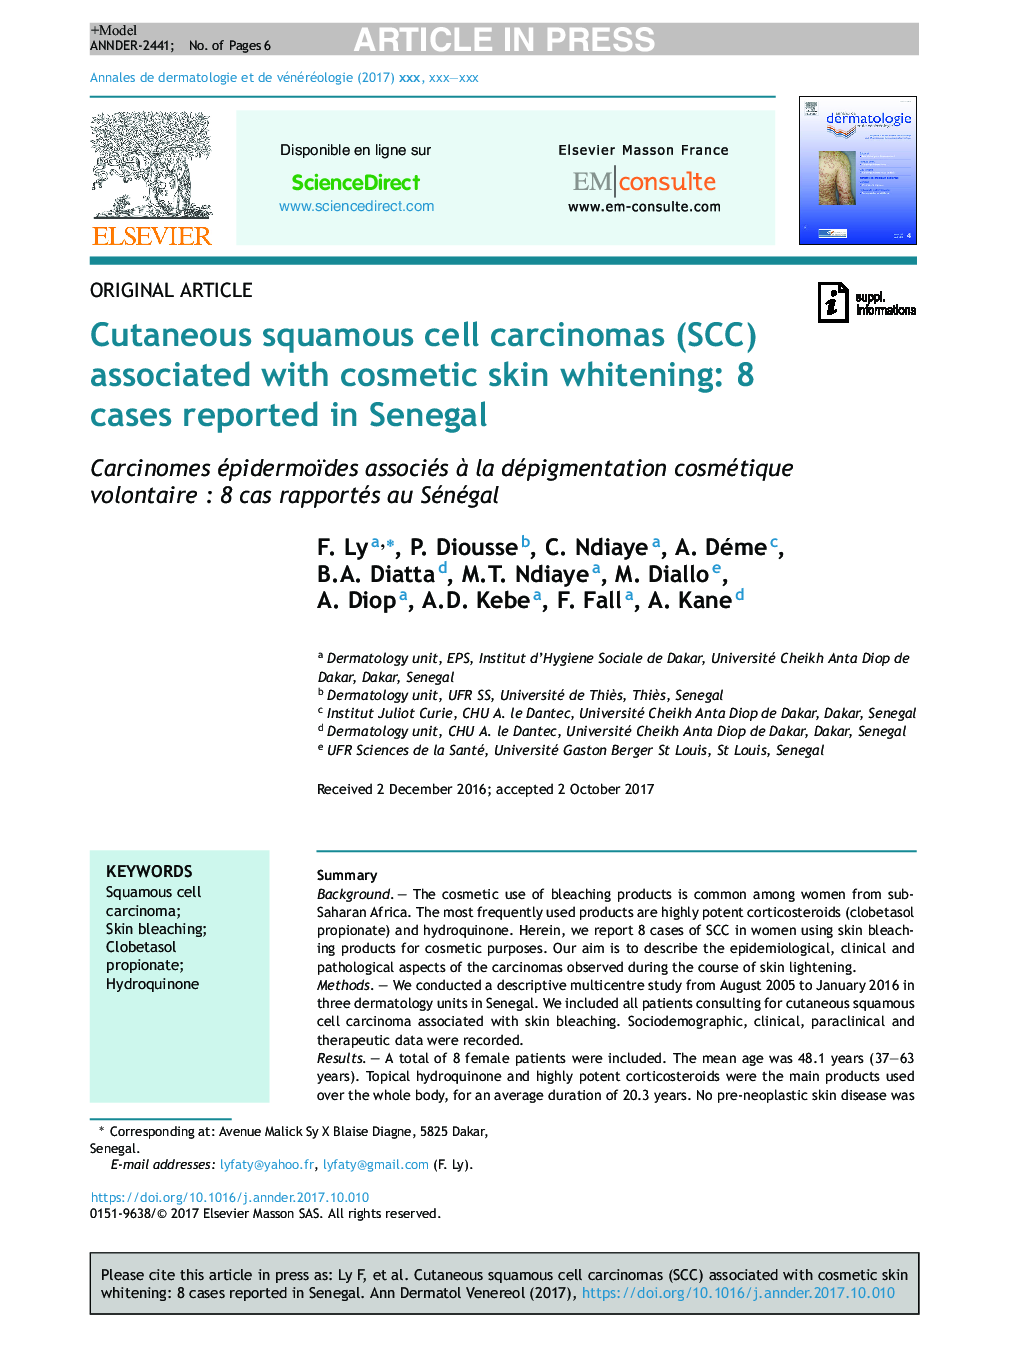 Cutaneous squamous cell carcinomas (SCC) associated with cosmetic skin whitening: 8 cases reported in Senegal